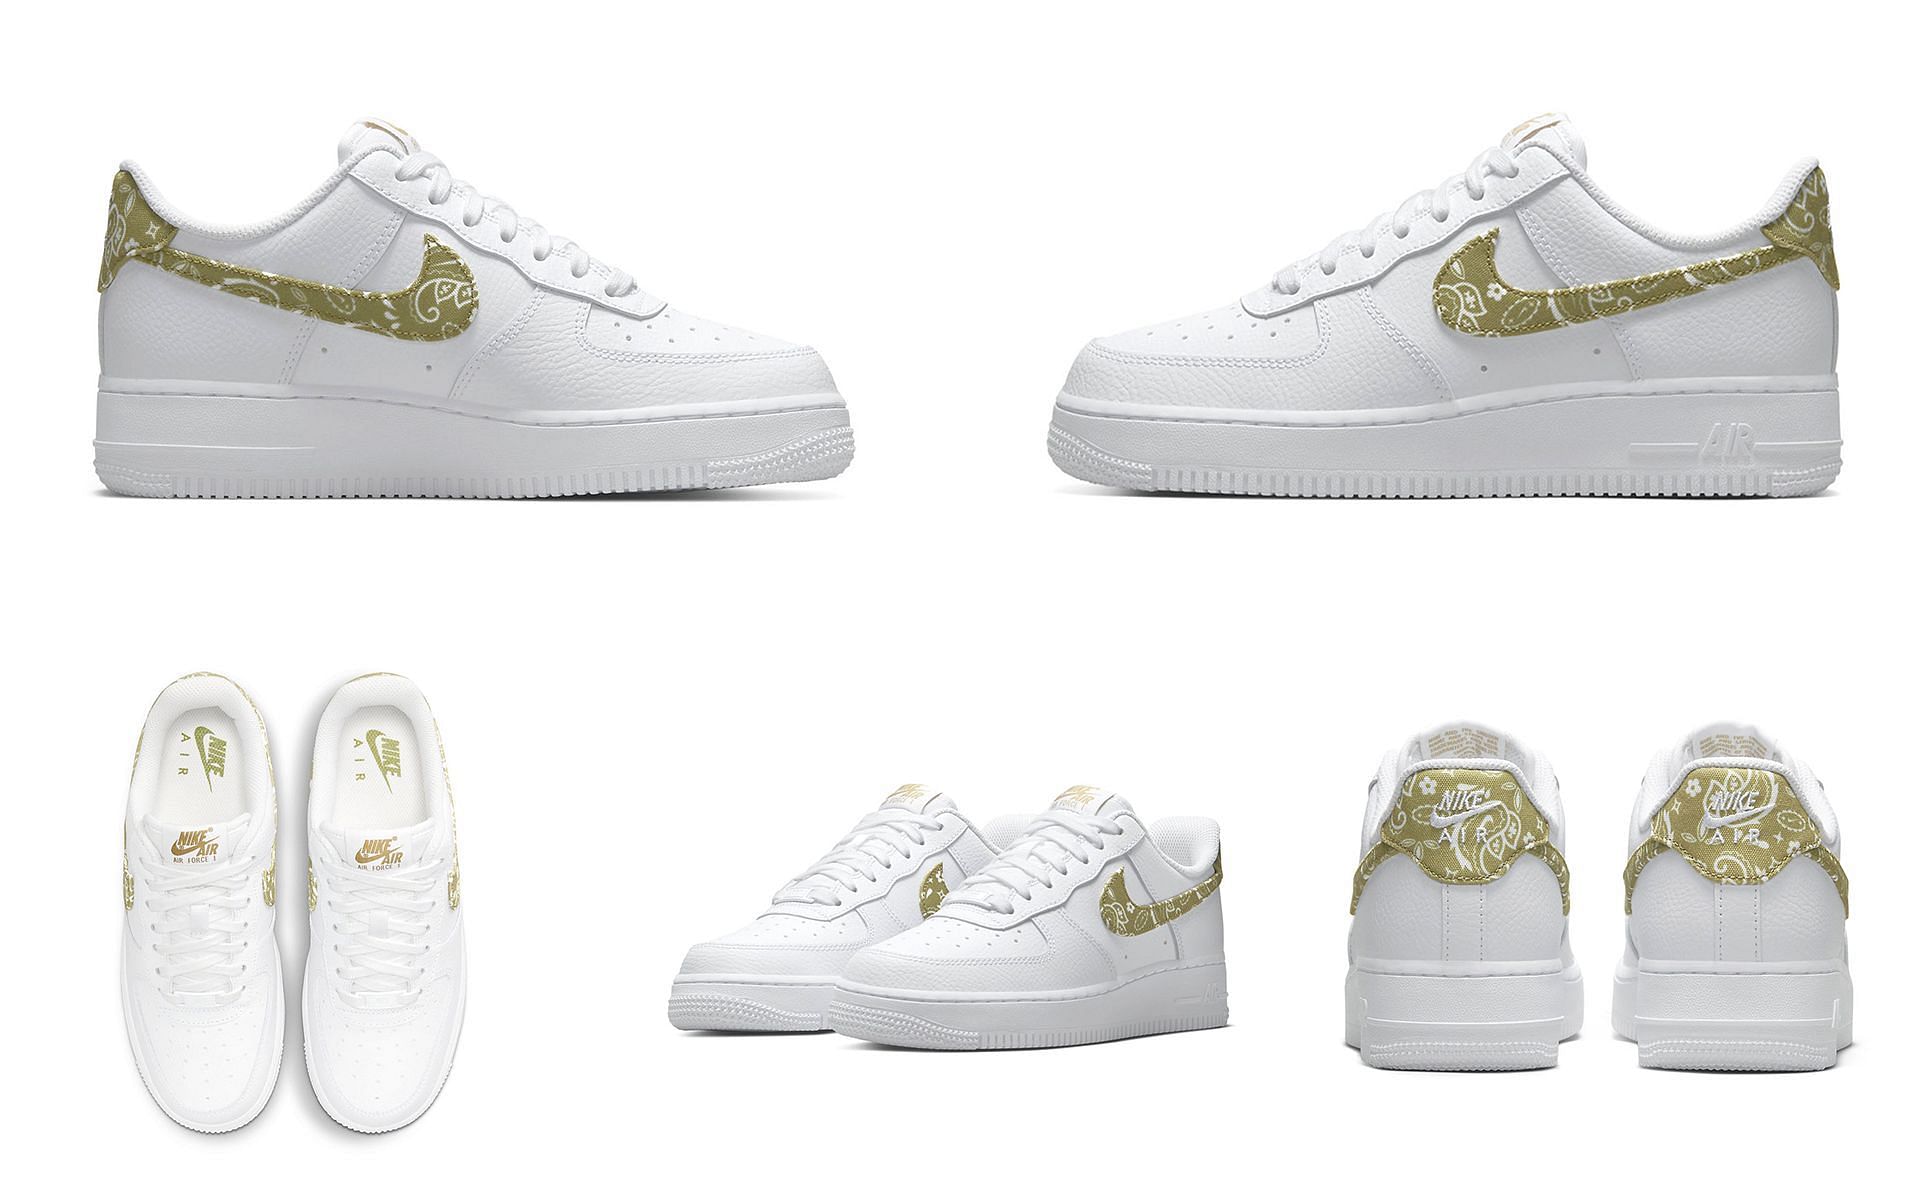 Nike is gearing up for the release of its latest Air Force 1 in Olive Paisley iteration (Image via Sportskeeda)